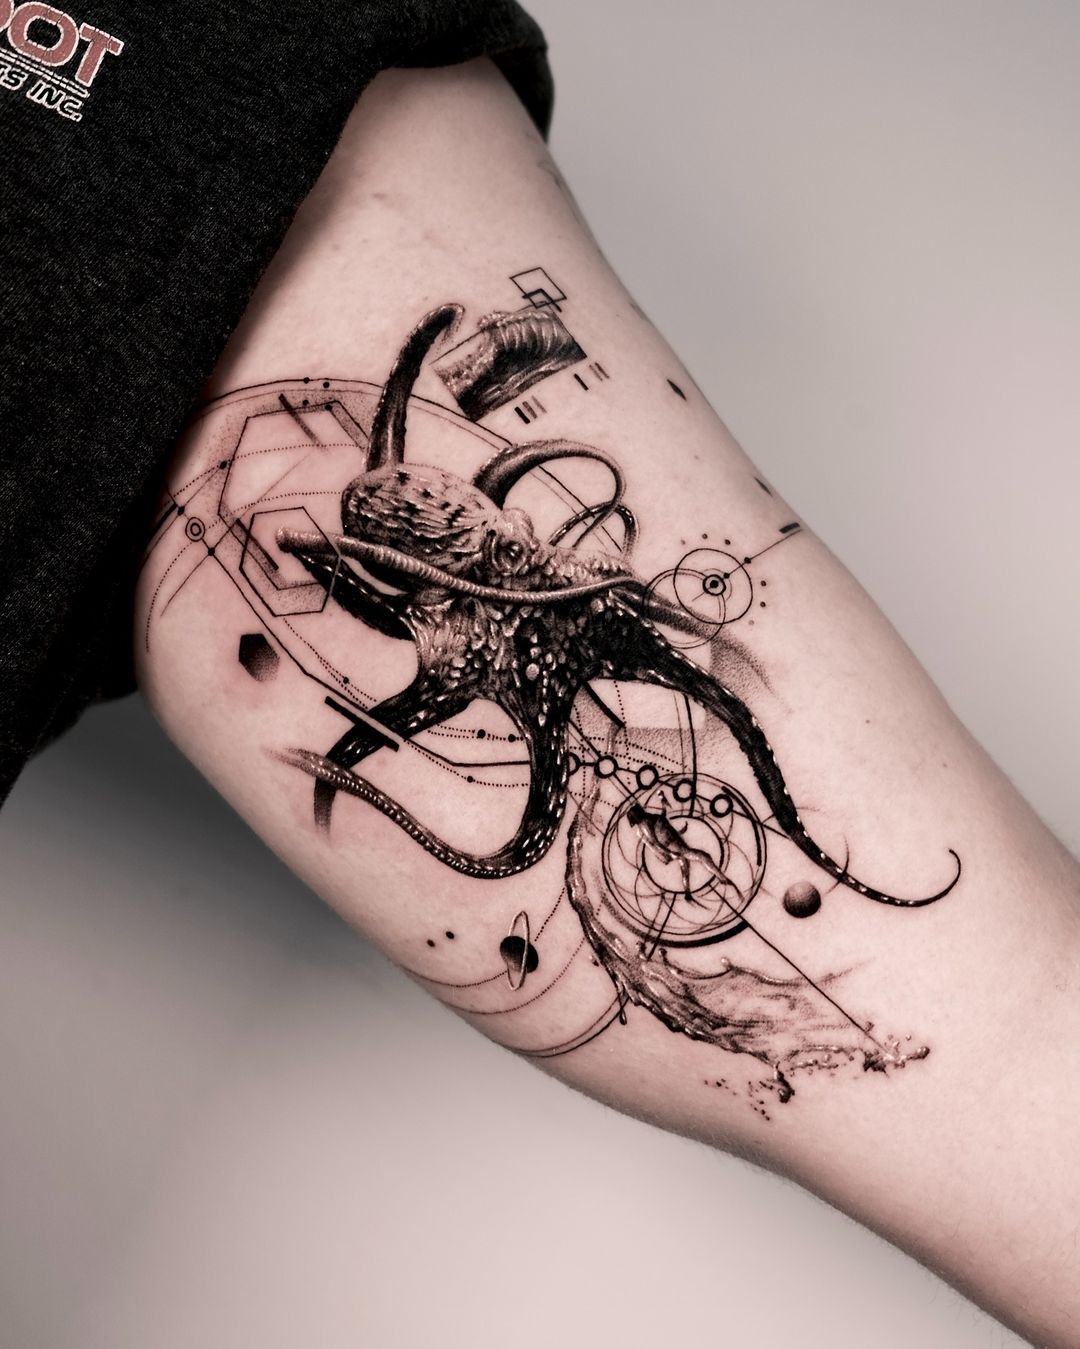 Realistic octopus design by even gmt.ink